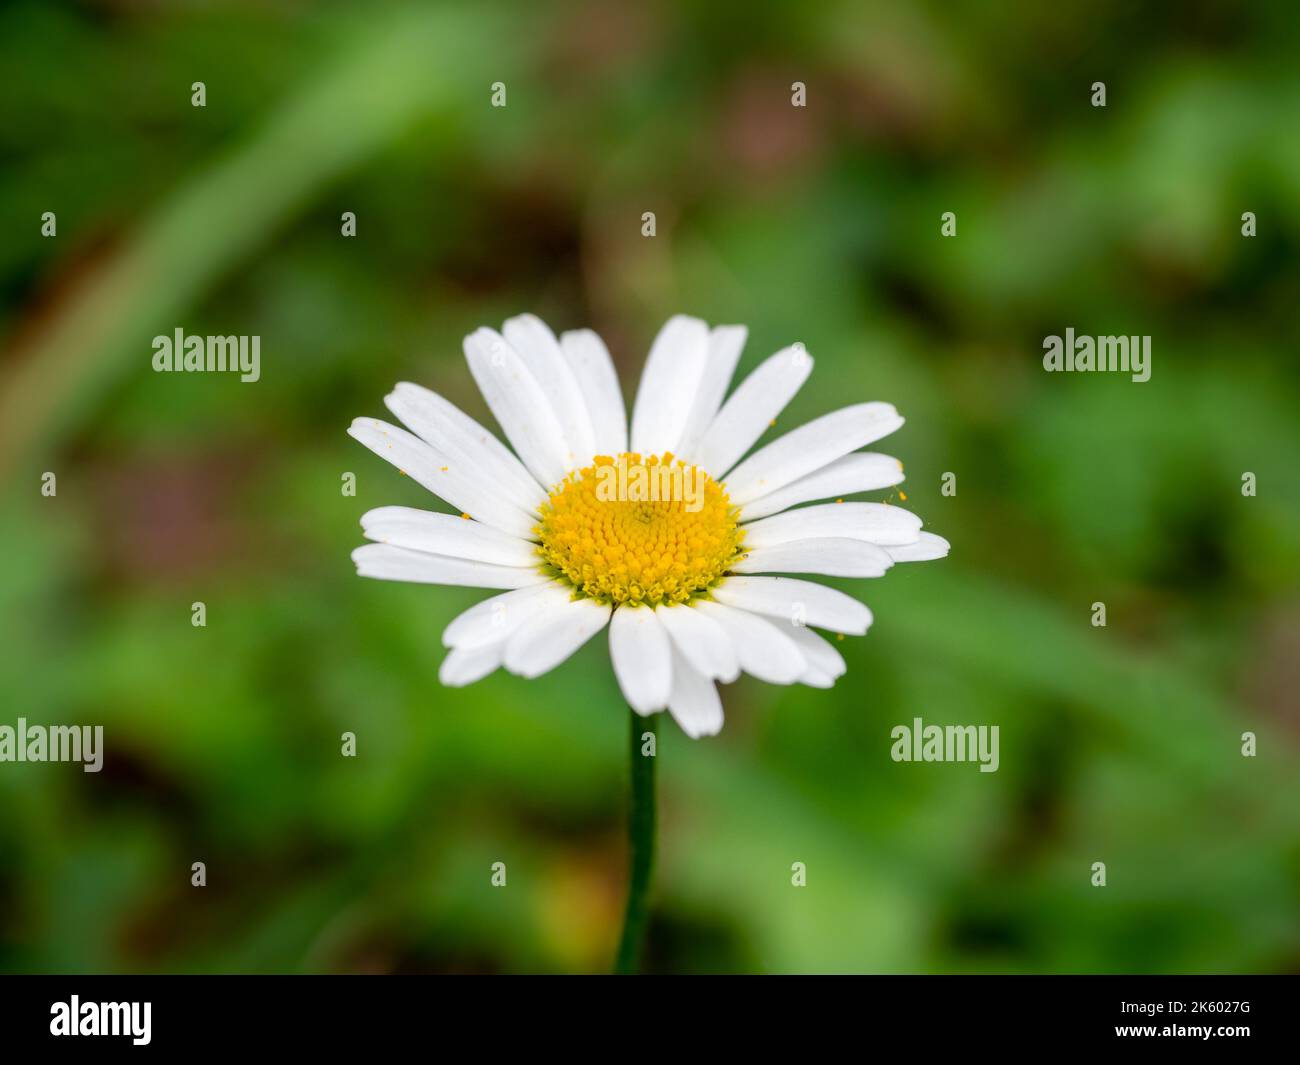 White Daisy Flower with a yellow centre with a green background Stock Photo